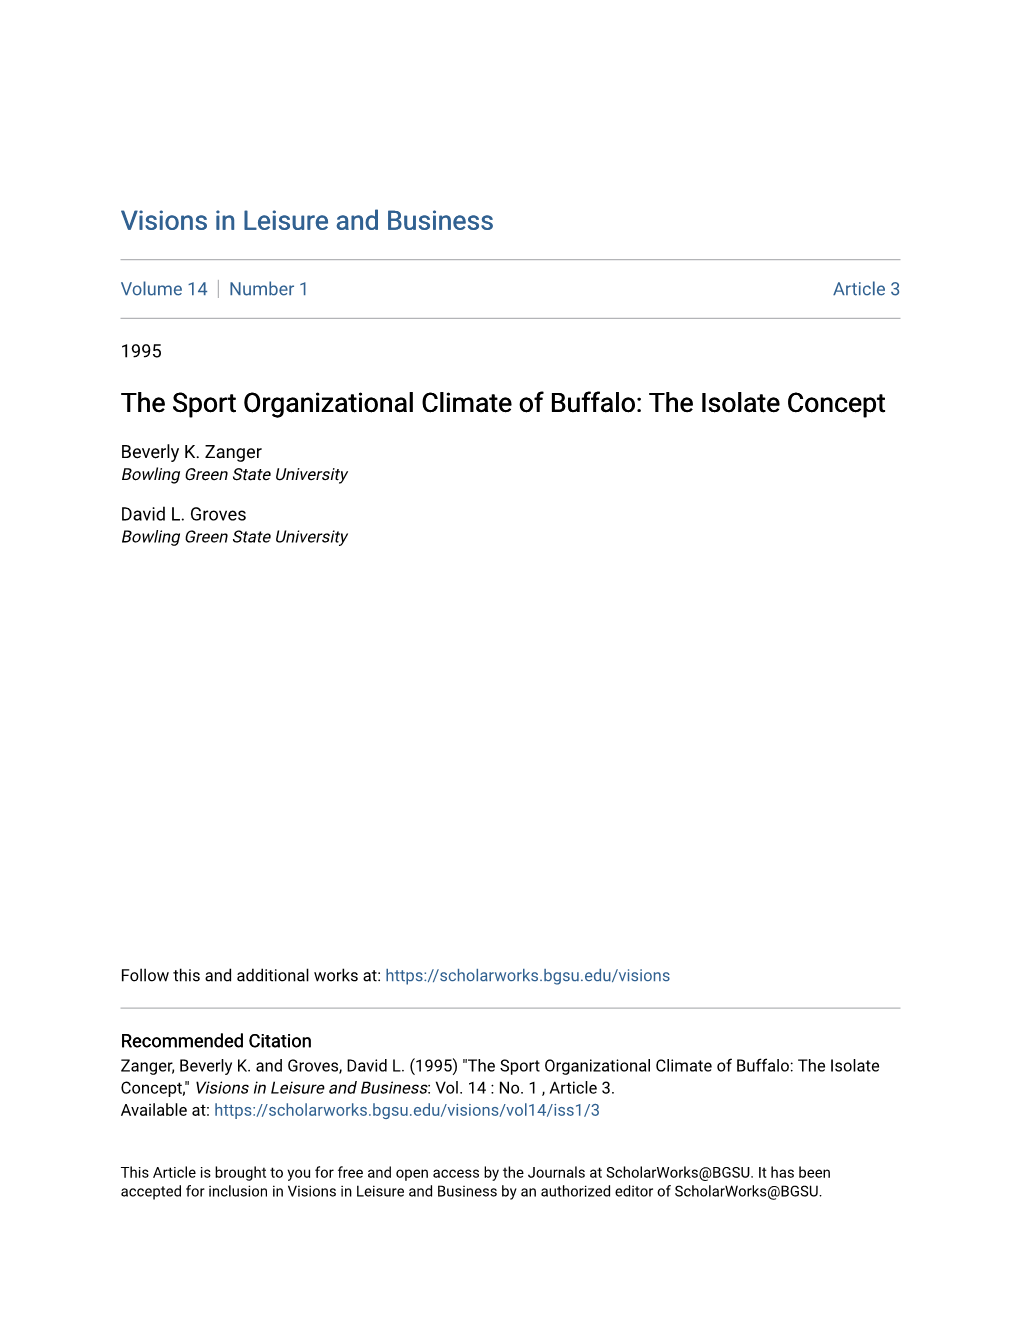 The Sport Organizational Climate of Buffalo: the Isolate Concept